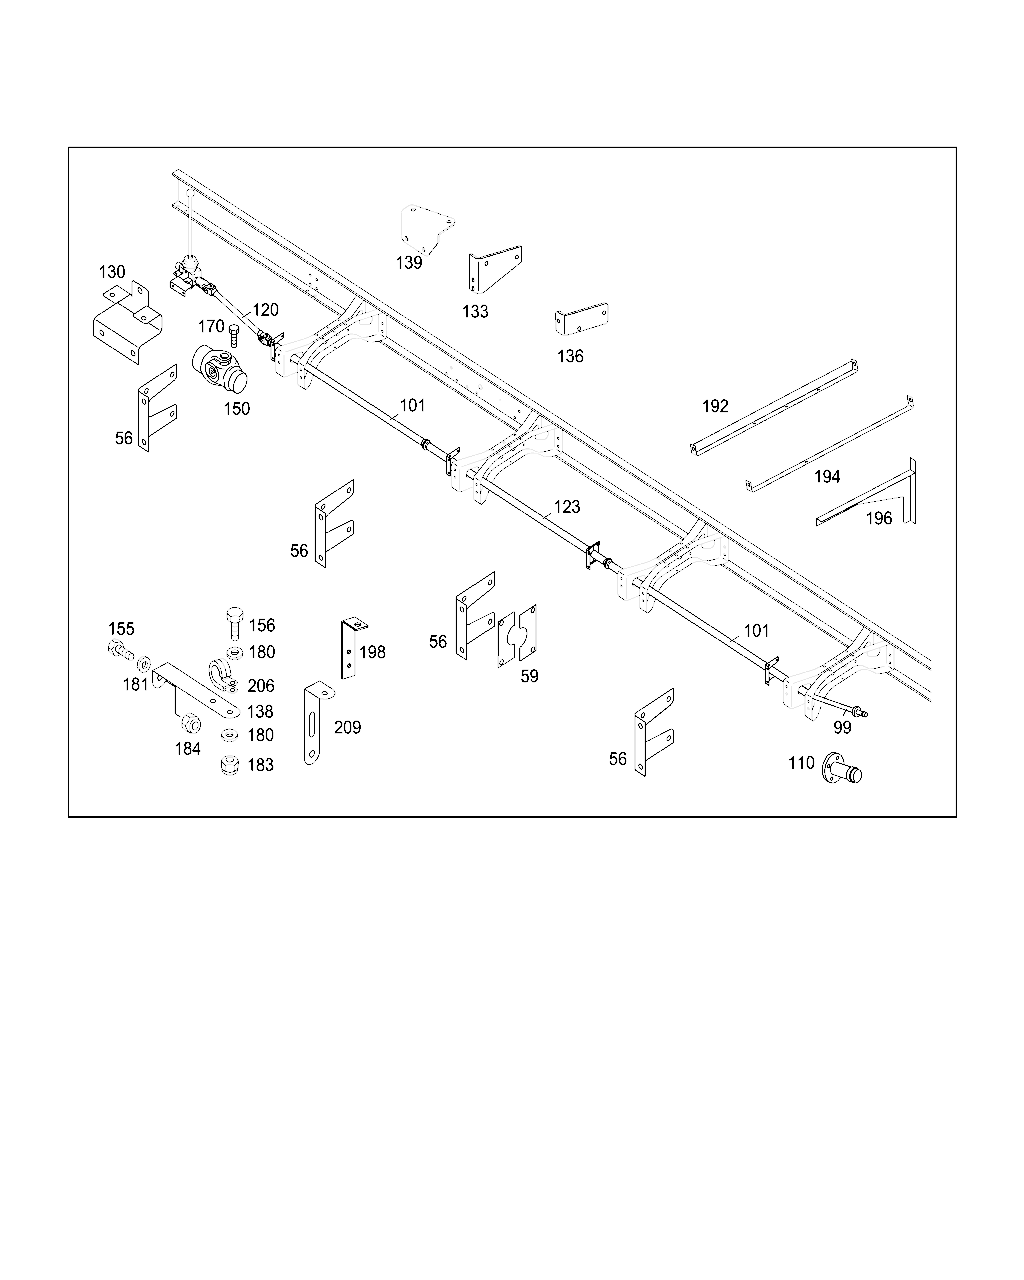 SHIFT LEVER AND SHIFTING PARTS [Автобус] MERCEDES [ЕВРОПА] [ШАССИ]OMC 1623 51 1626 51